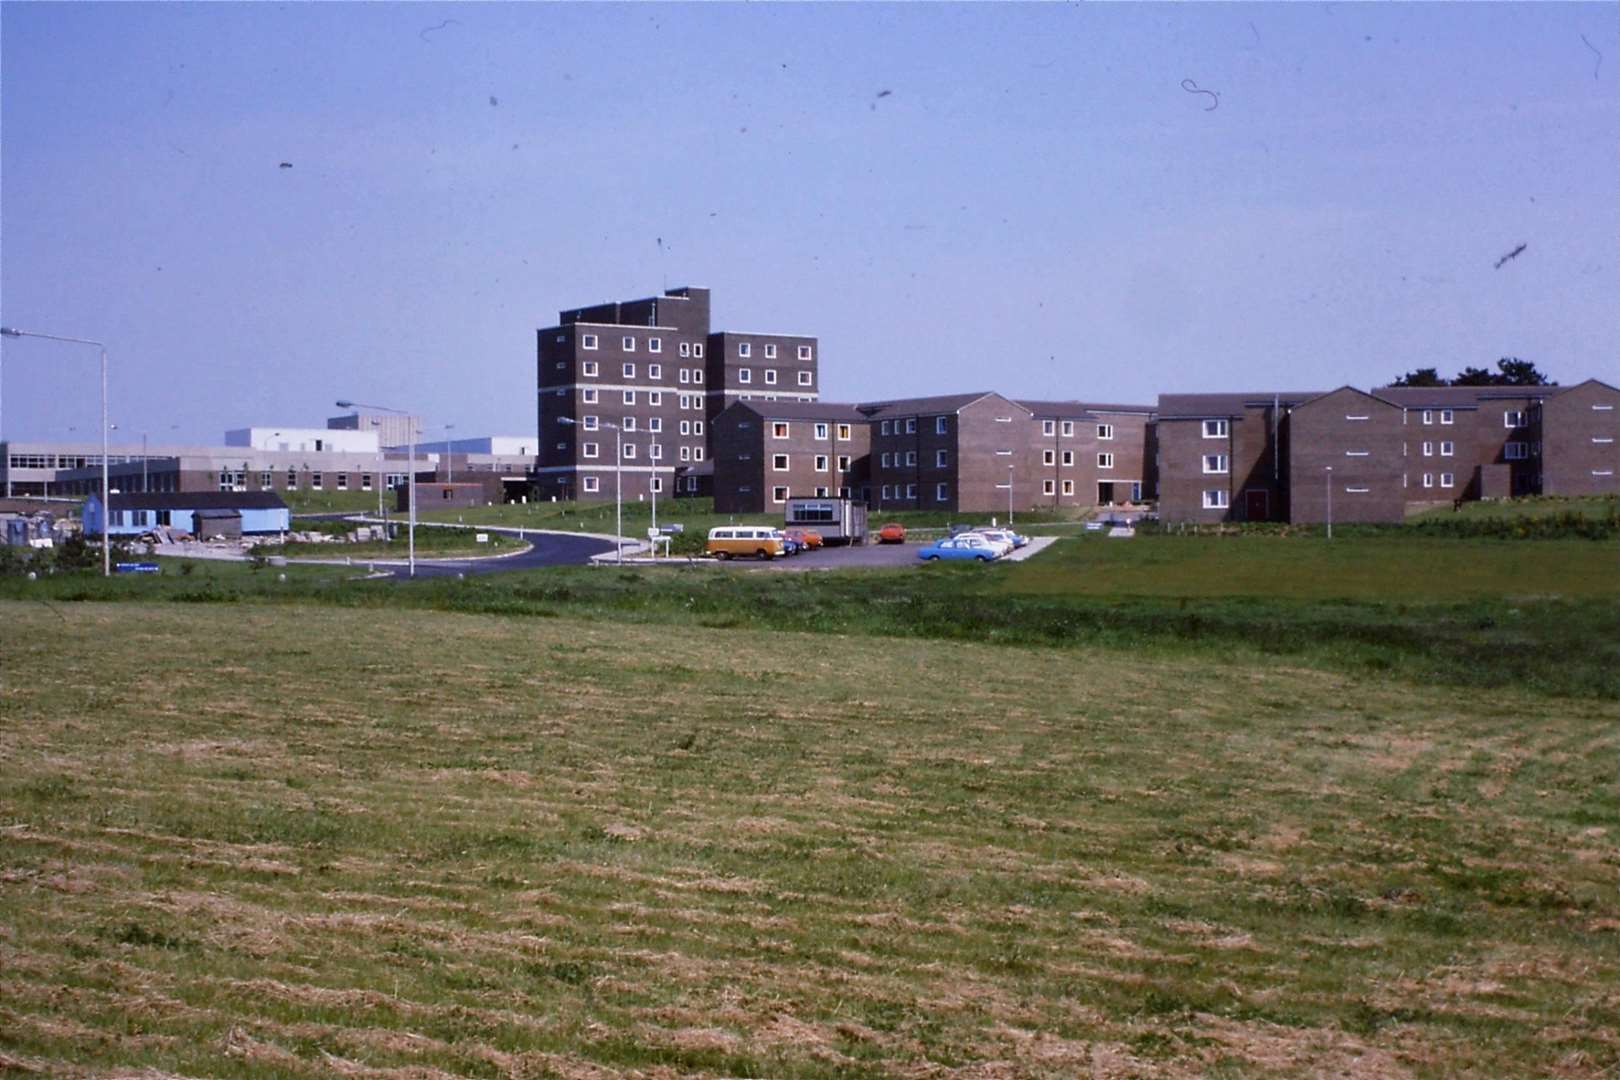 1979 - An early view of William Harvey Hospital at Lacton Green with the staff accommodation blocks pictured on the right